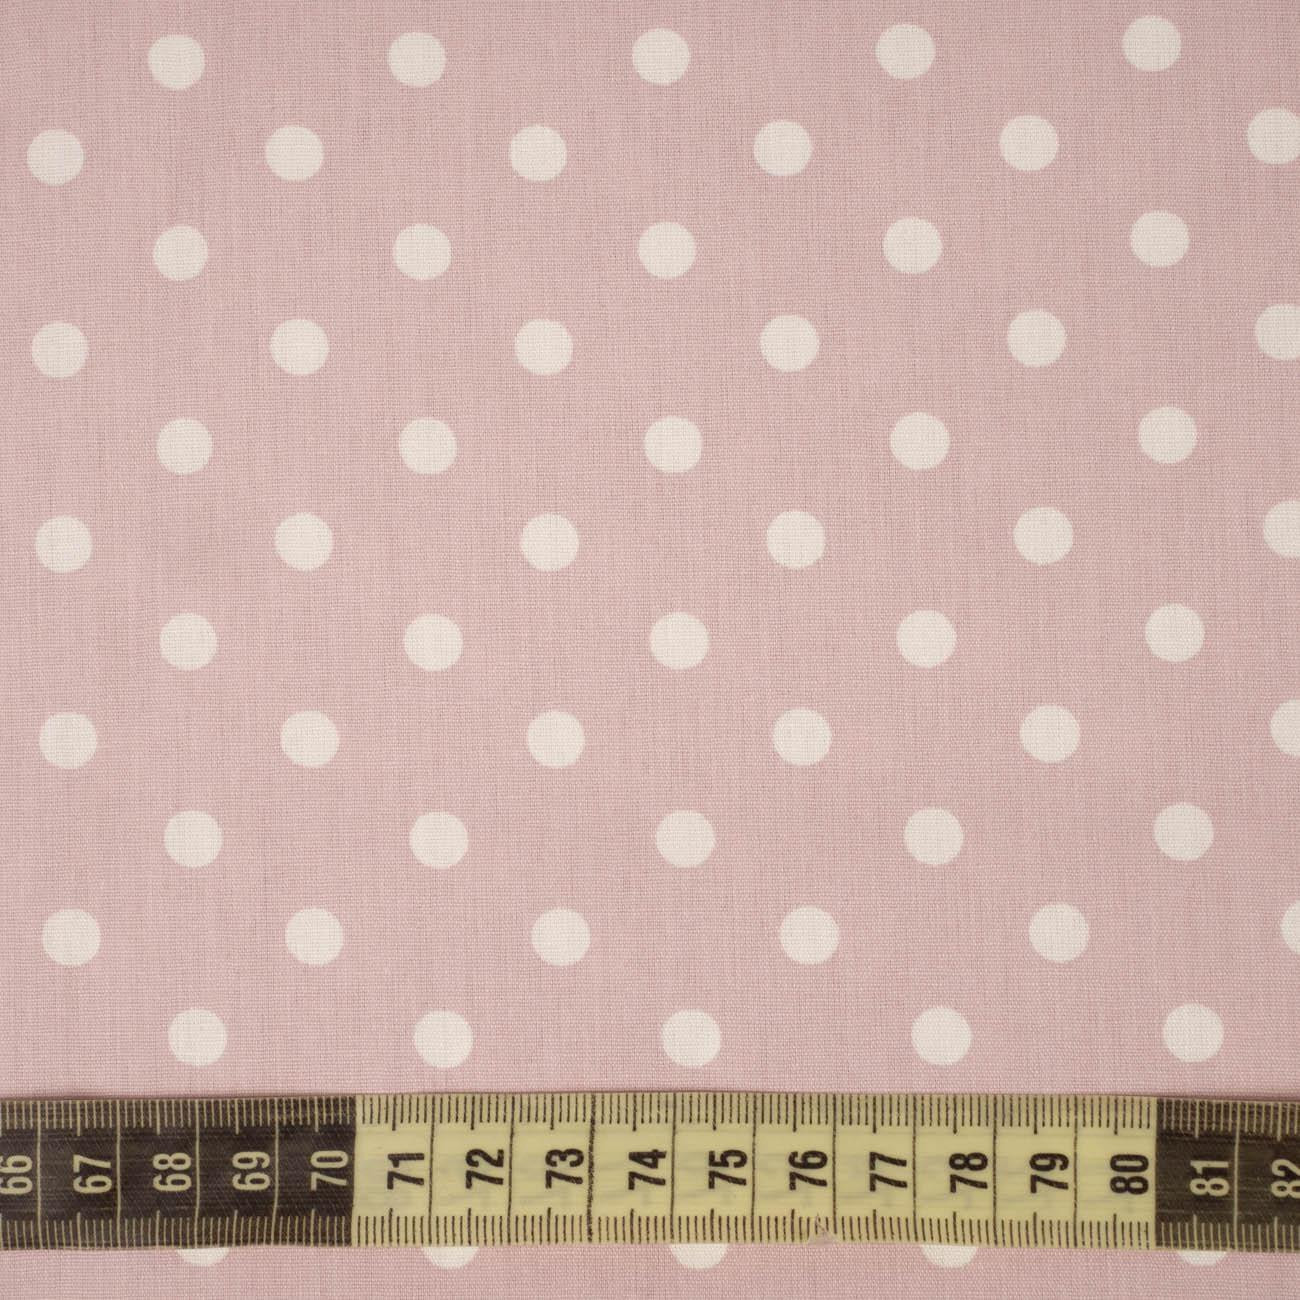 WHITE PEAS / DIRTY PINK - Cotton woven fabric